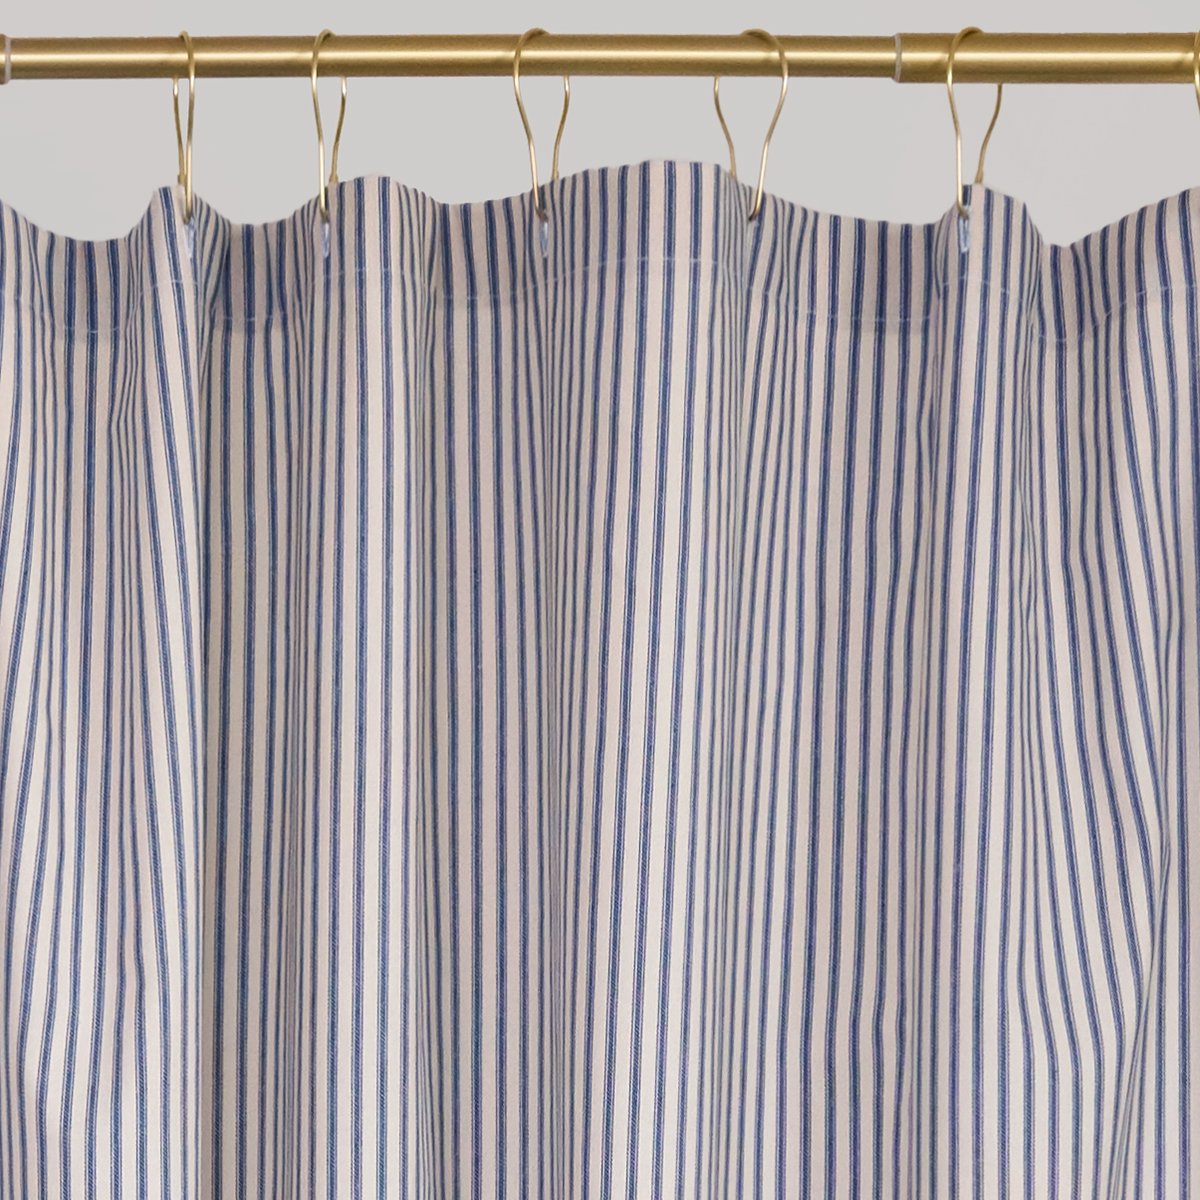 Ruffled Ticking Stripe Shower Curtain Navy Blue – Southern Ticking Co.